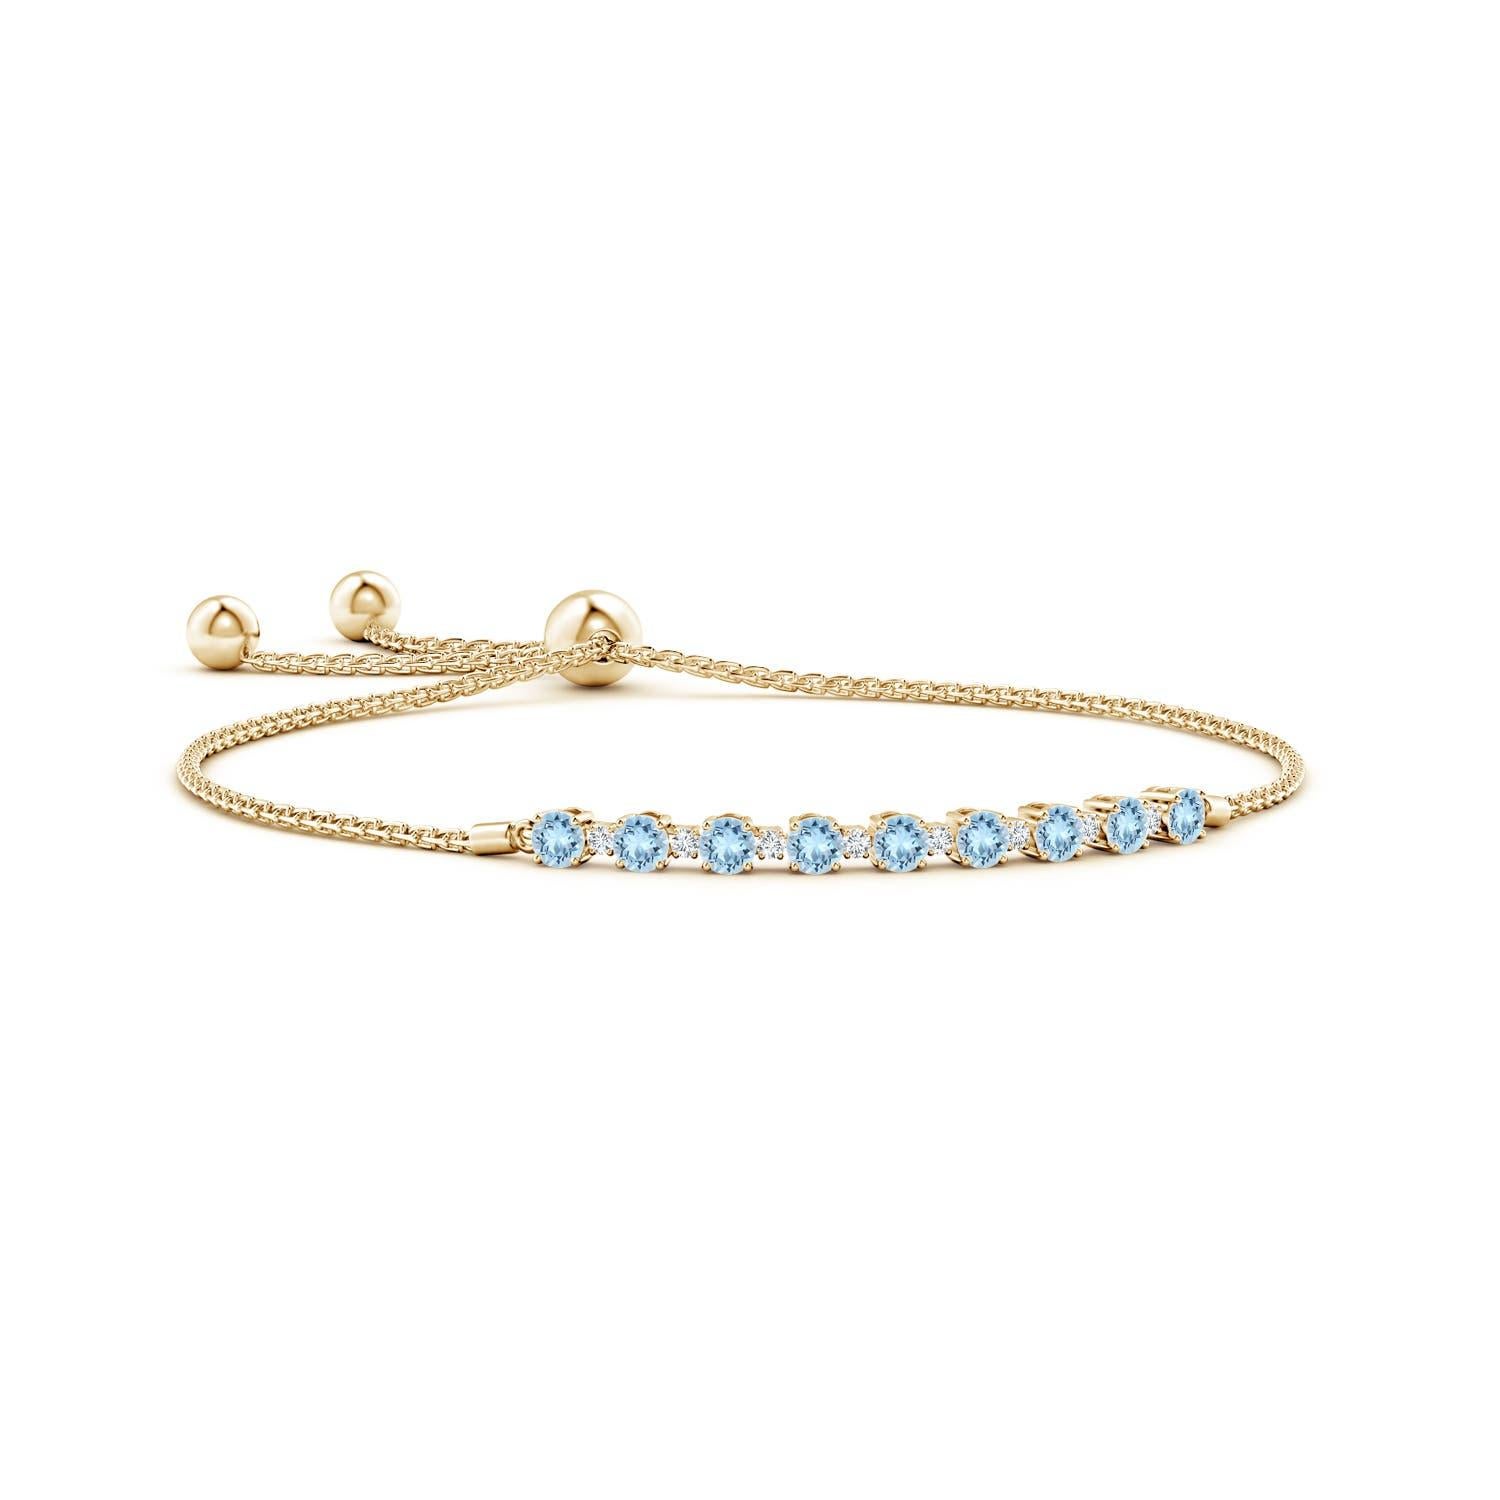 Sea blue aquamarines and glittering diamonds come together on this 14k yellow gold tennis bolo bracelet. They are prong set alternately and create a classic look. This bracelet is adjustable to fit most wrists.